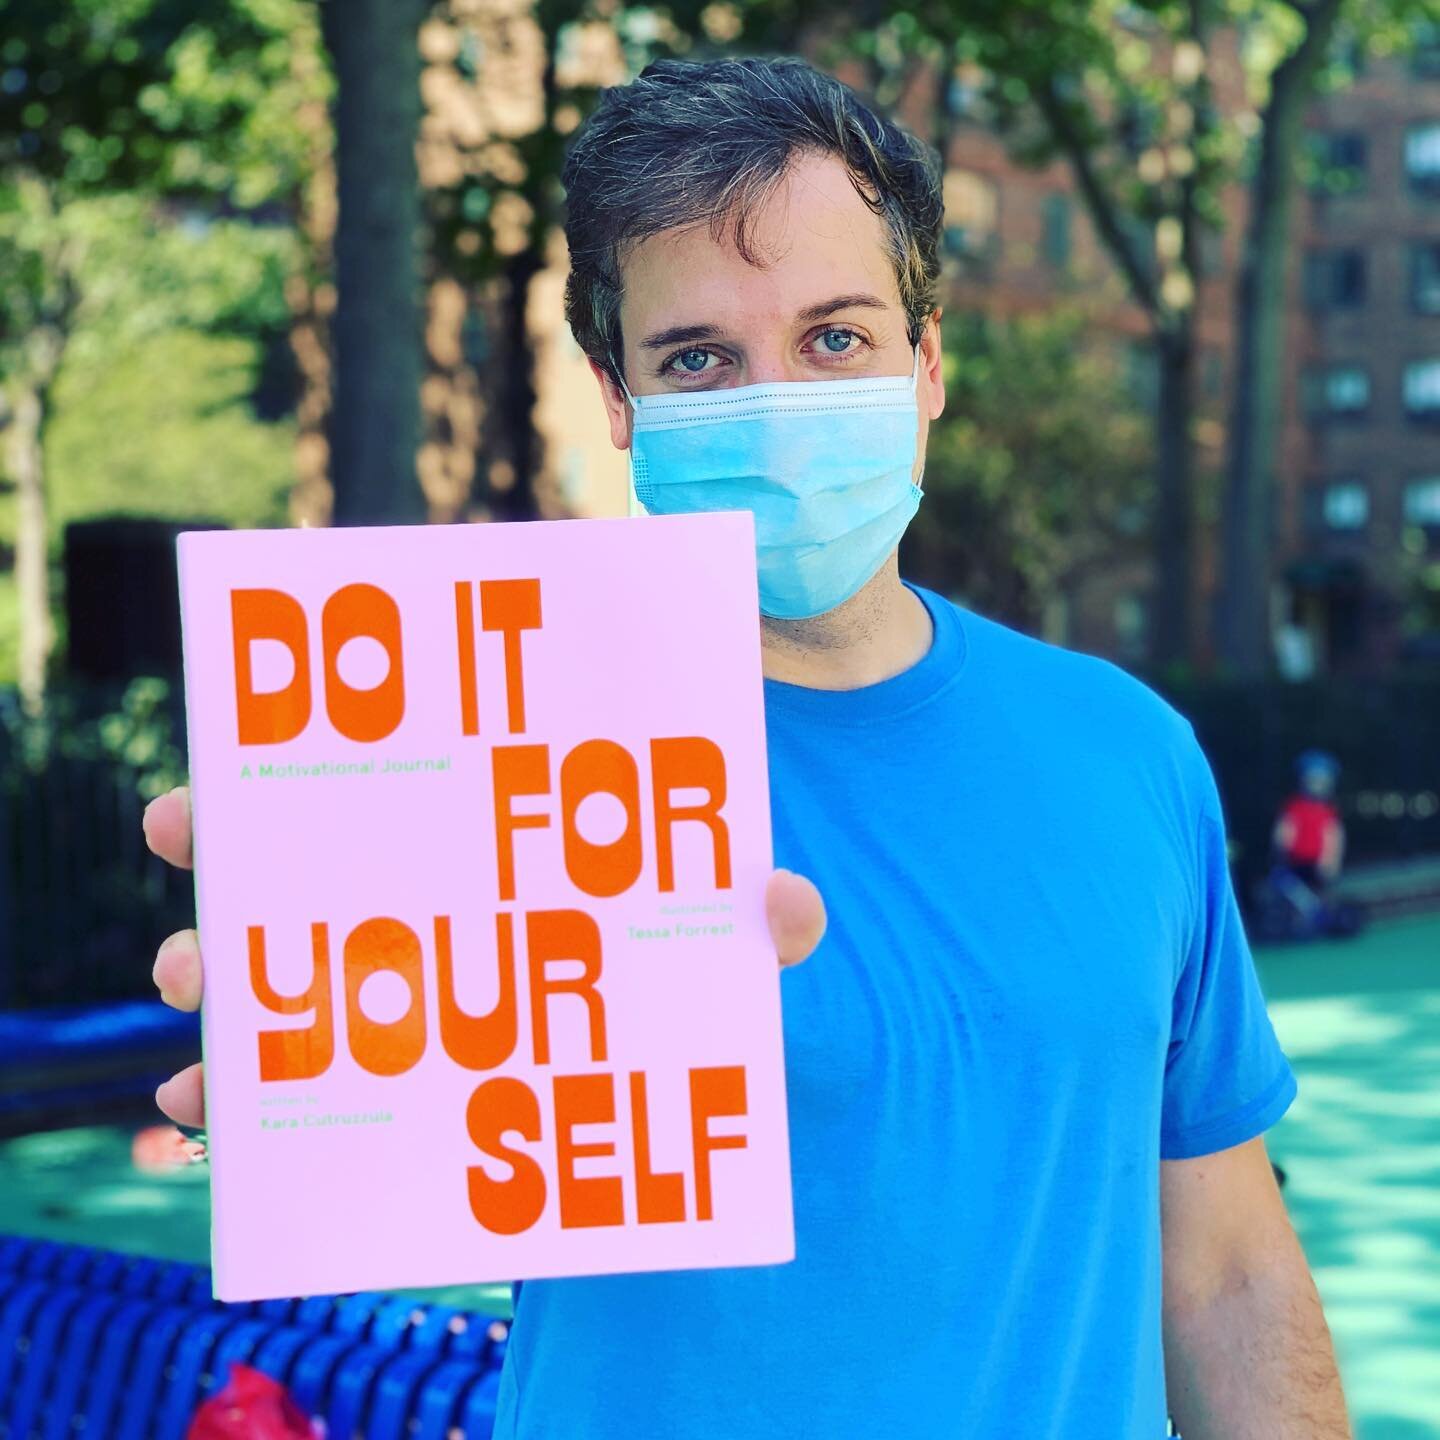 My talented friend and productivity expert @karacut&rsquo;s first book came out last week, it&rsquo;s called Do It For Yourself and it&rsquo;s a motivational journal designed to help you through creative projects - I absolutely love it and cannot rec